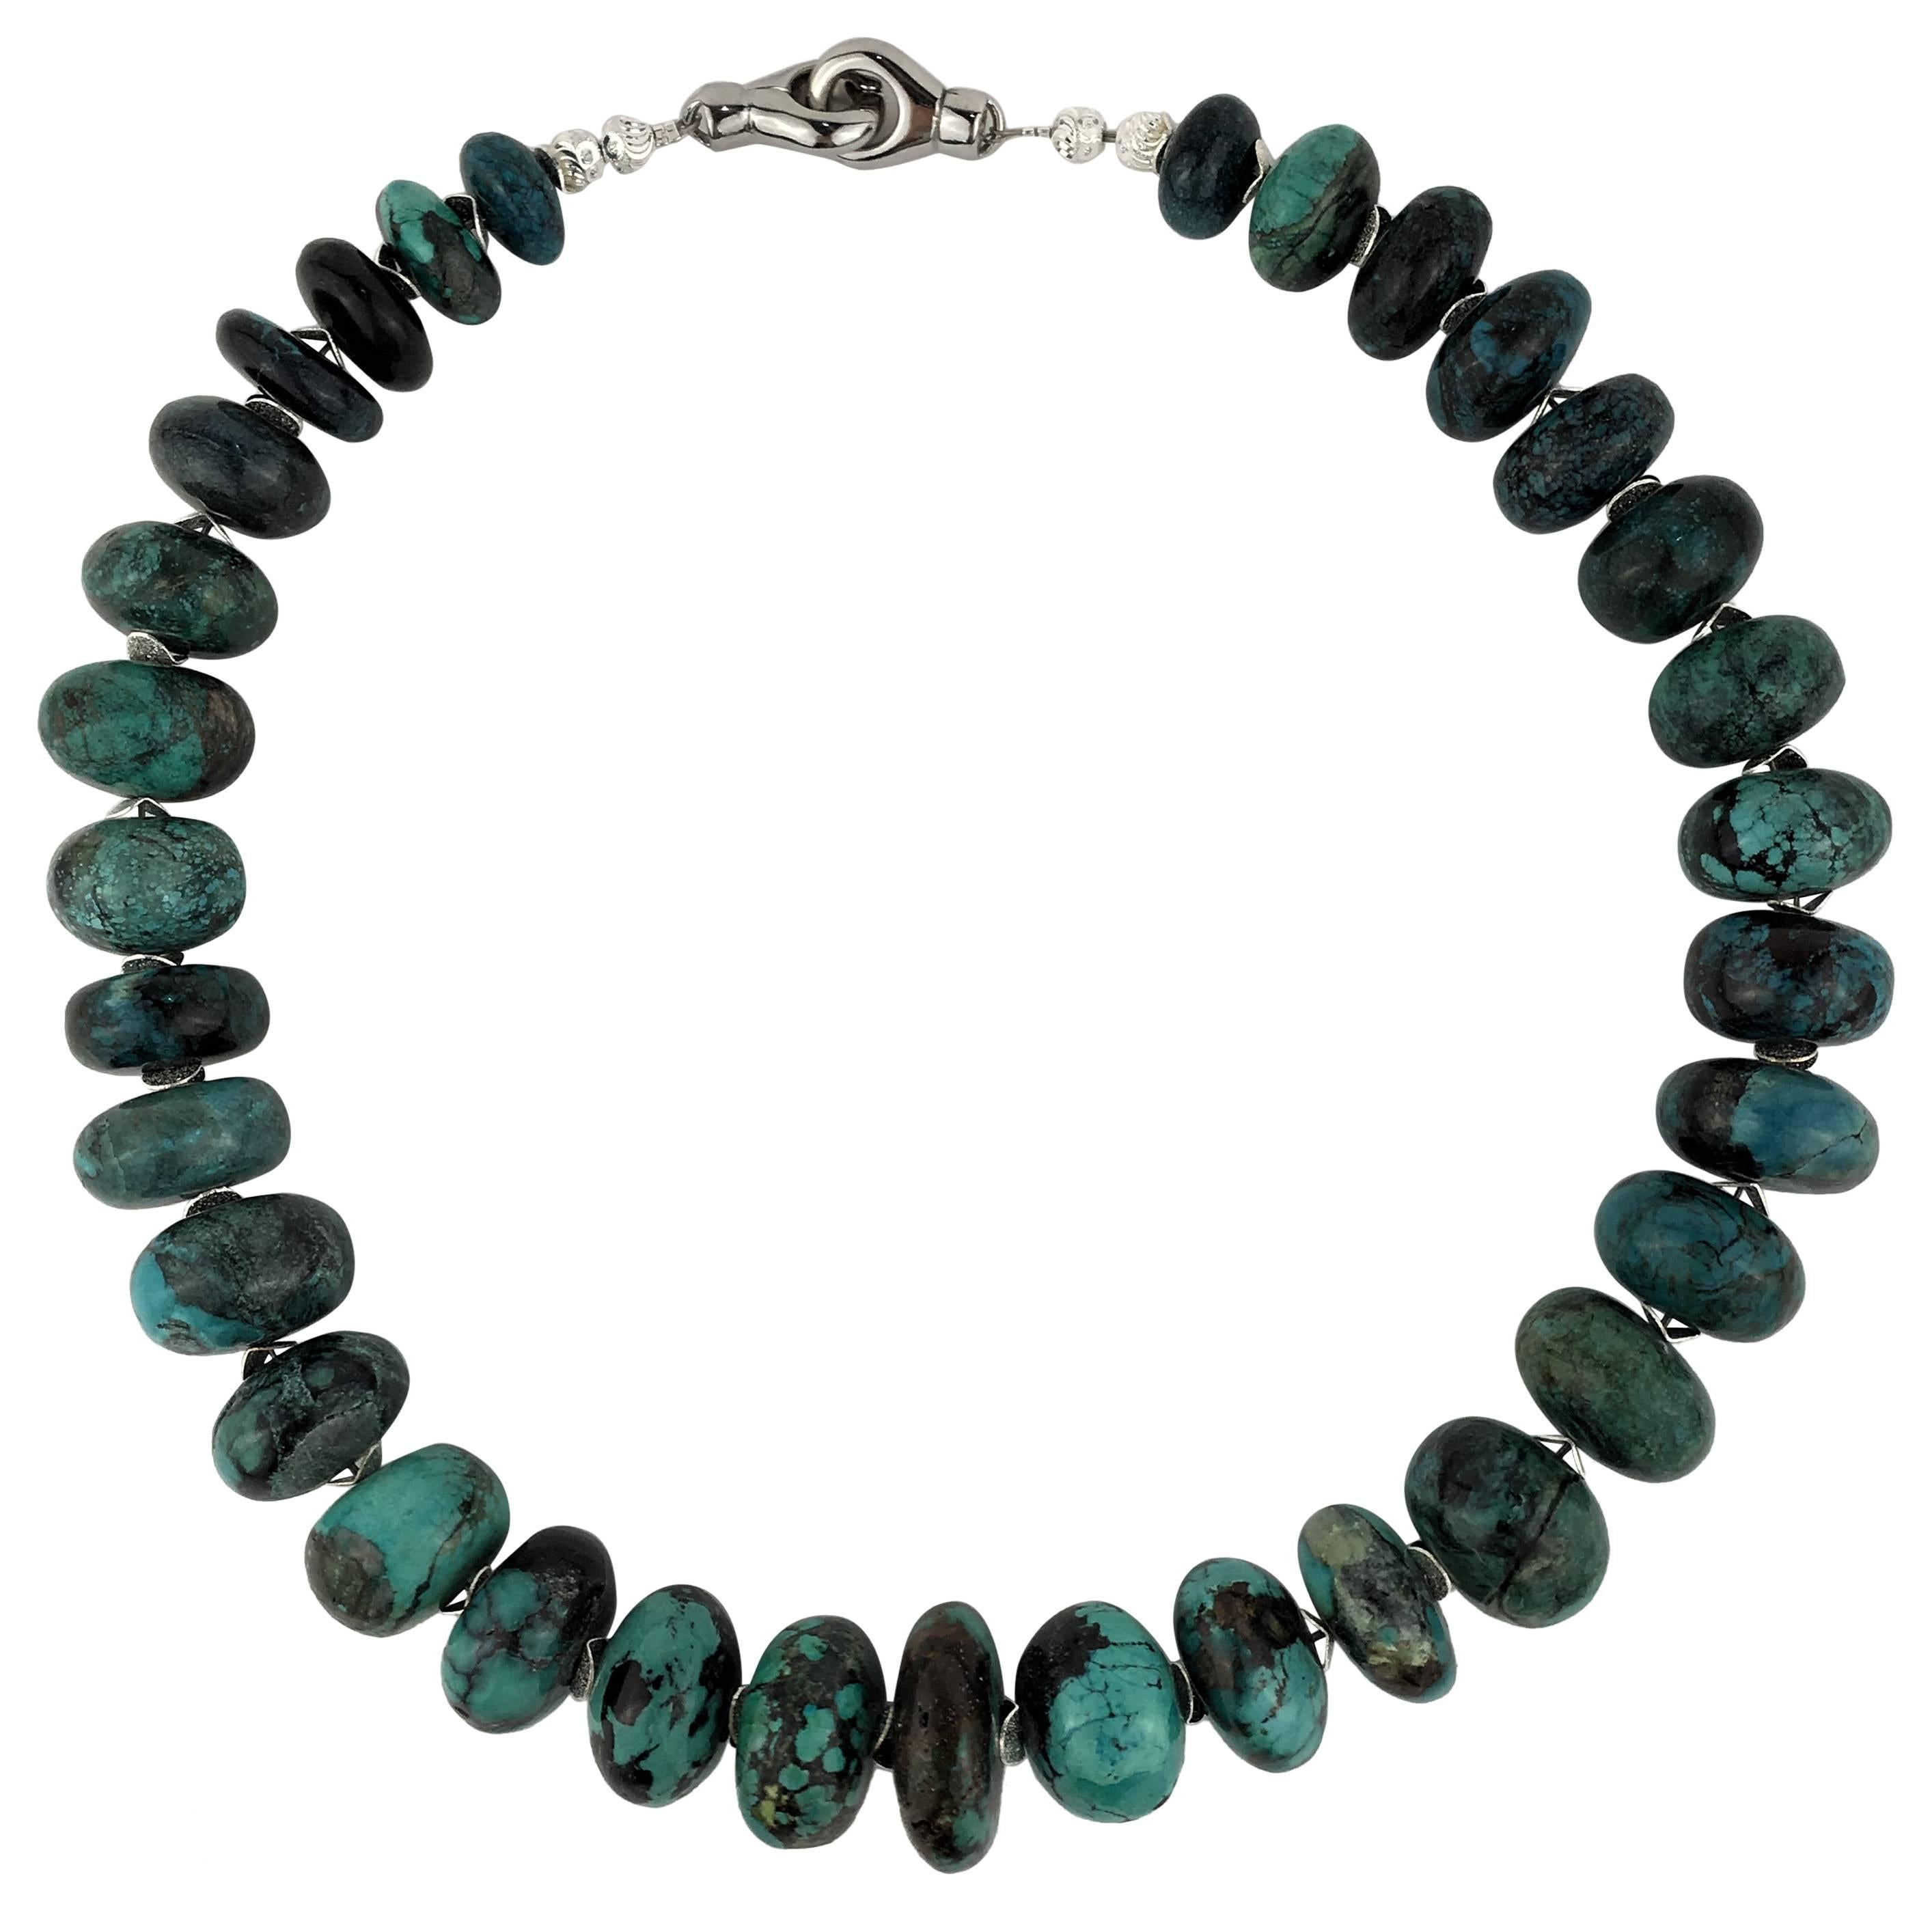 Artisan AJD 21 Inch Graduated Turquoise Rondelles with Silver Tone Flutters Necklace